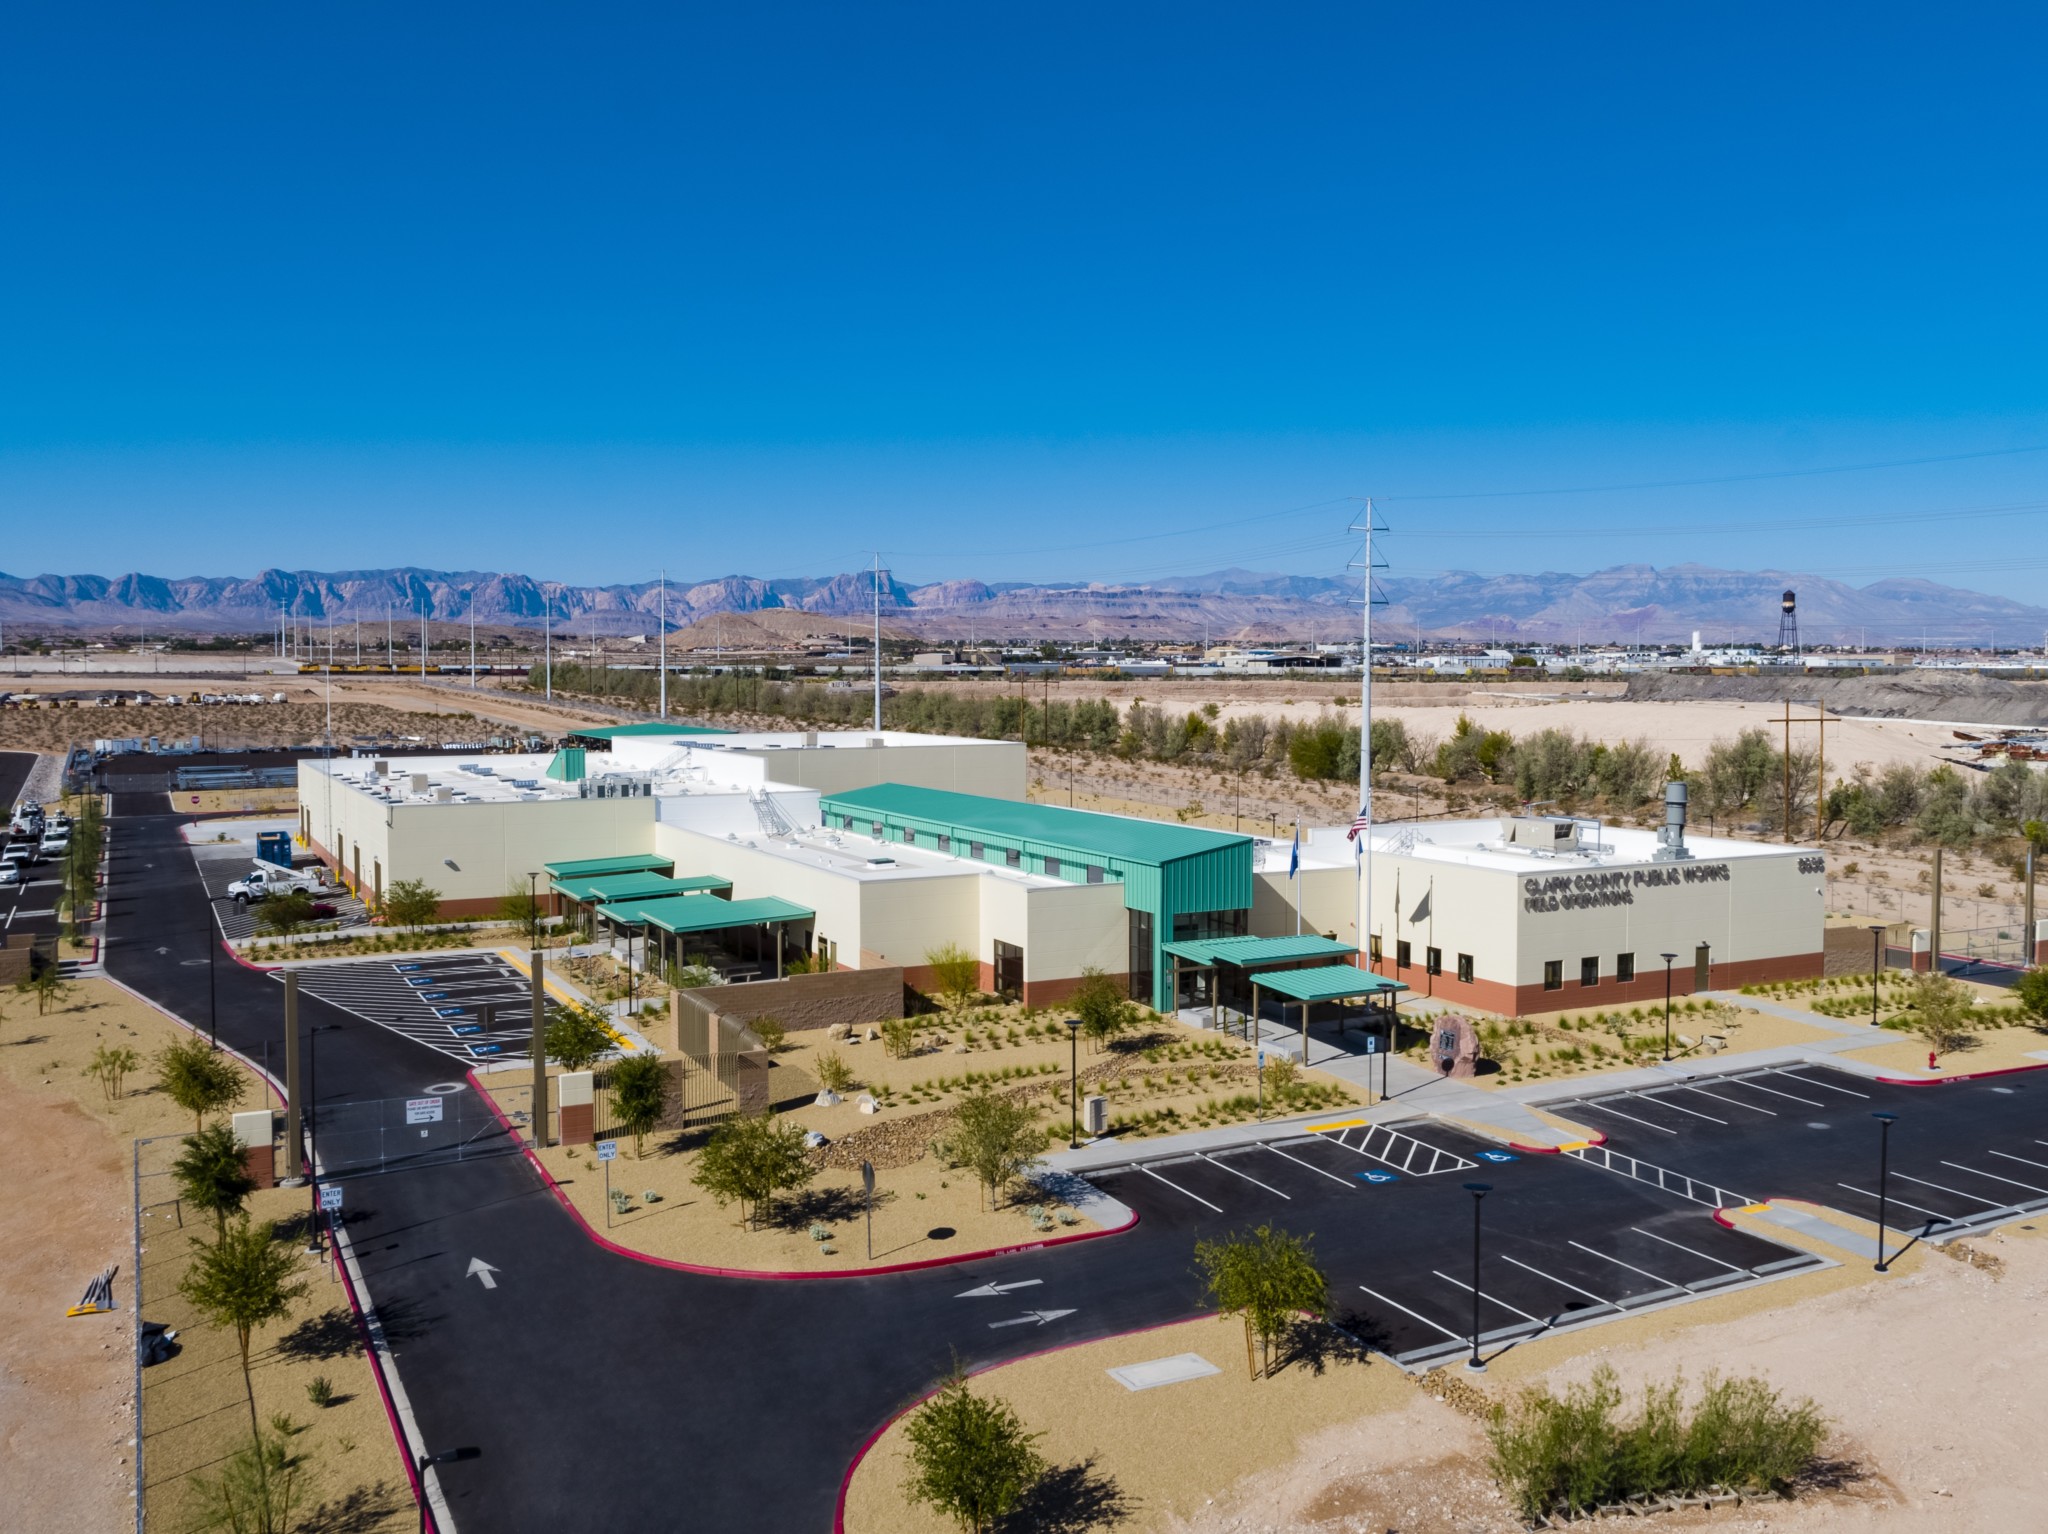 An aerial view of the completed Clark County Public Works multi-use facility in Southwest Las Vegas, designed by LGA Architecture.